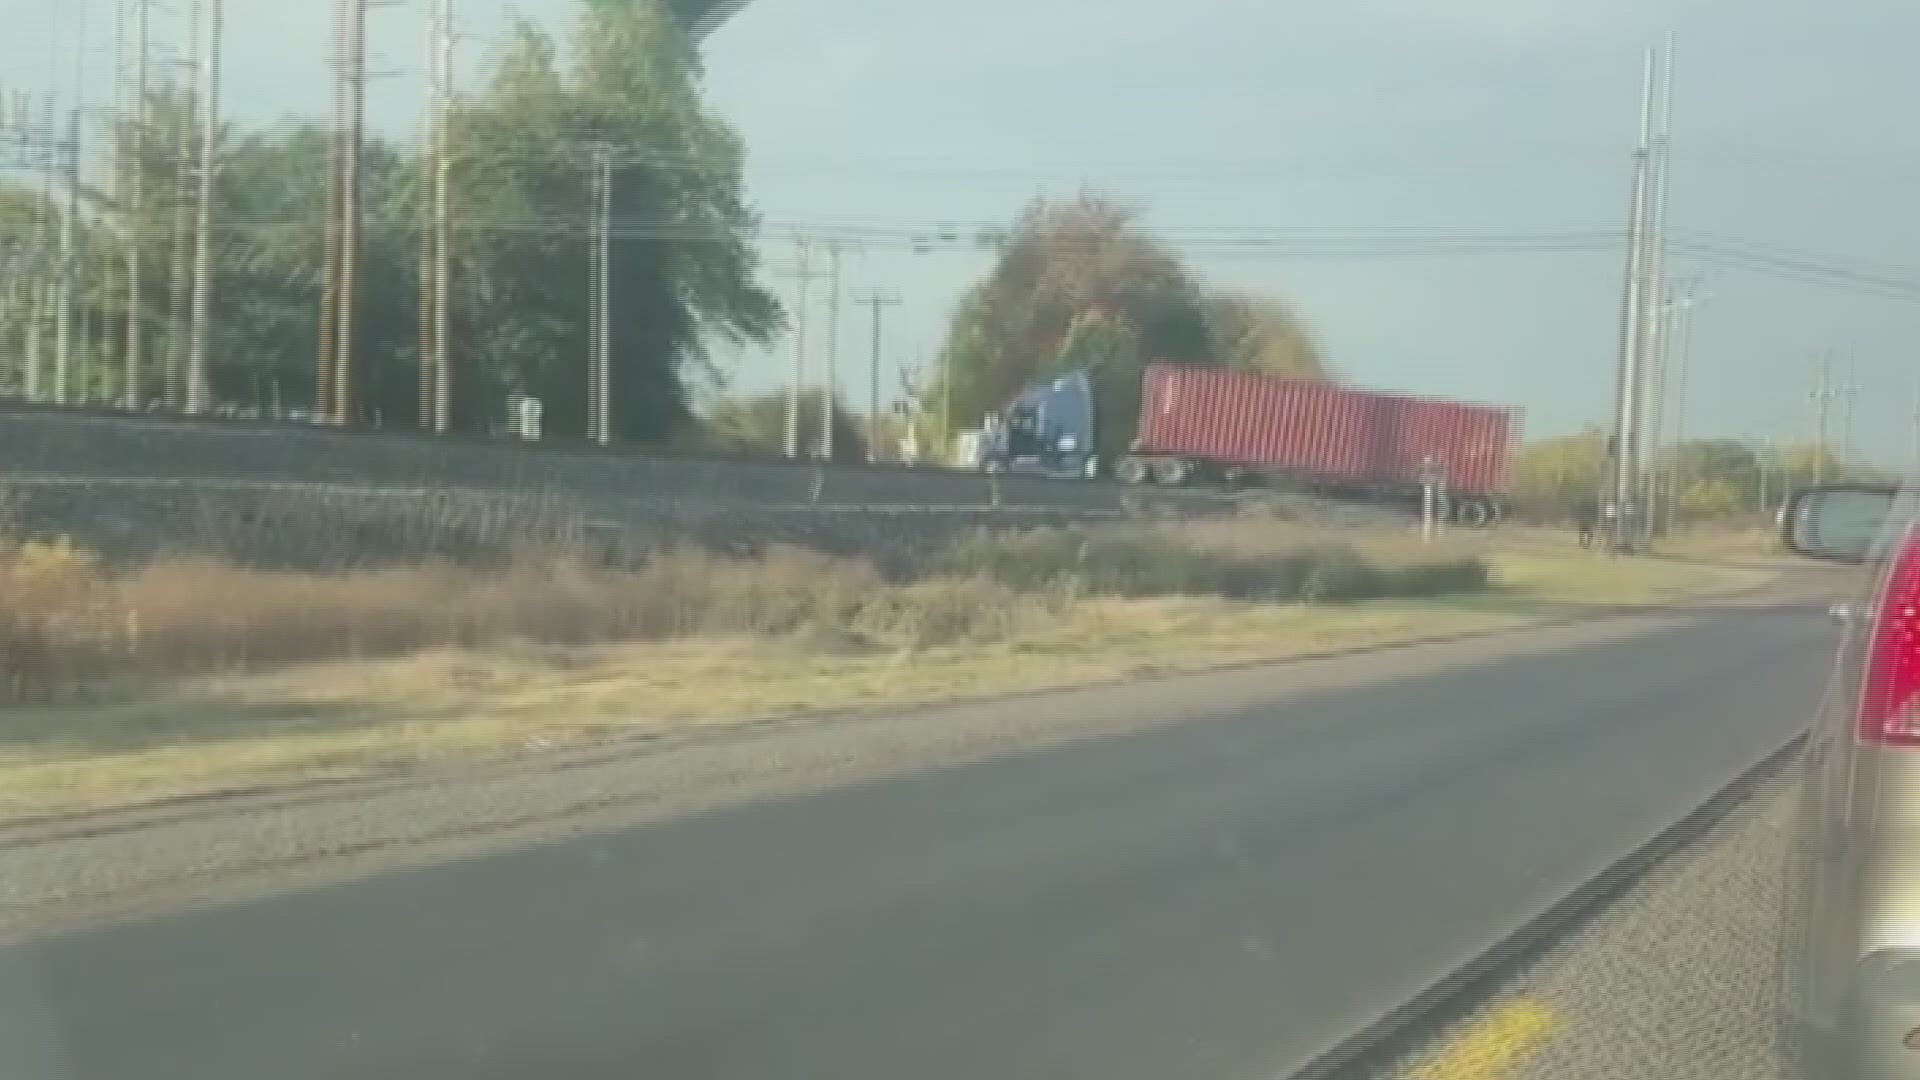 A train struck a semi along US 36 in Pendleton, Indiana Friday afternoon.